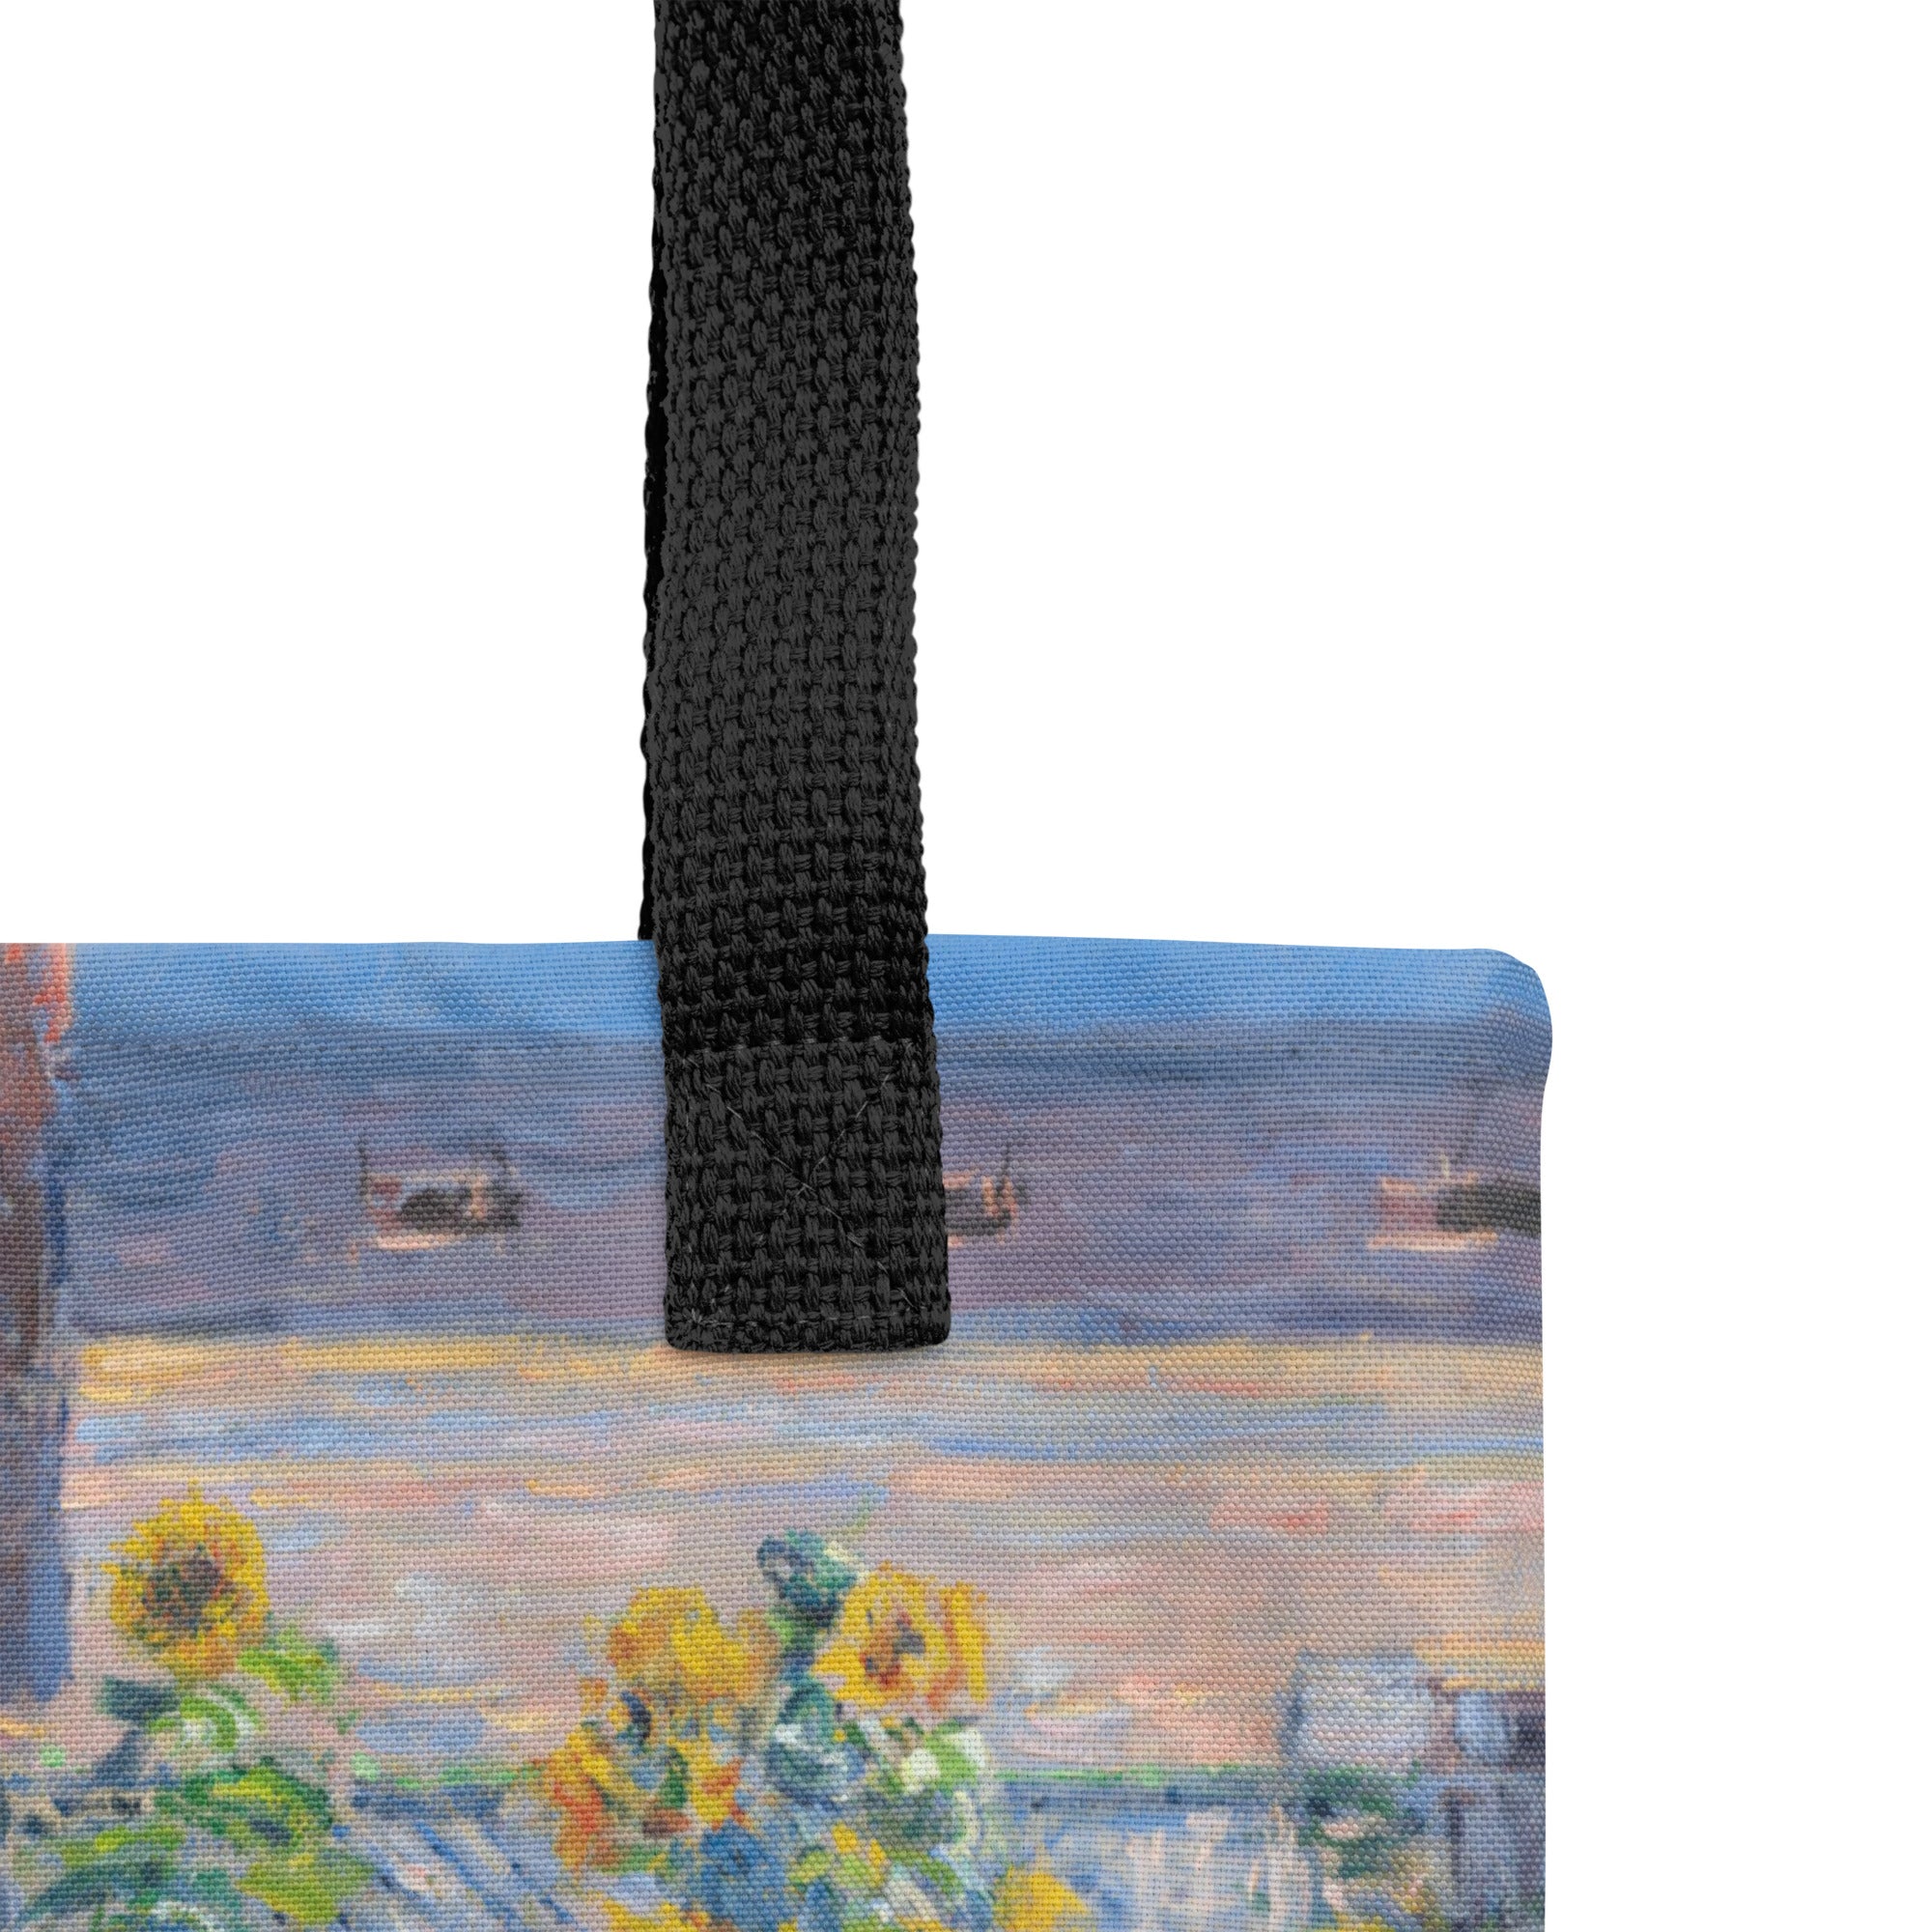 Claude Monet 'The Artist's Garden at Vétheuil' Famous Painting Totebag | Allover Print Art Tote Bag